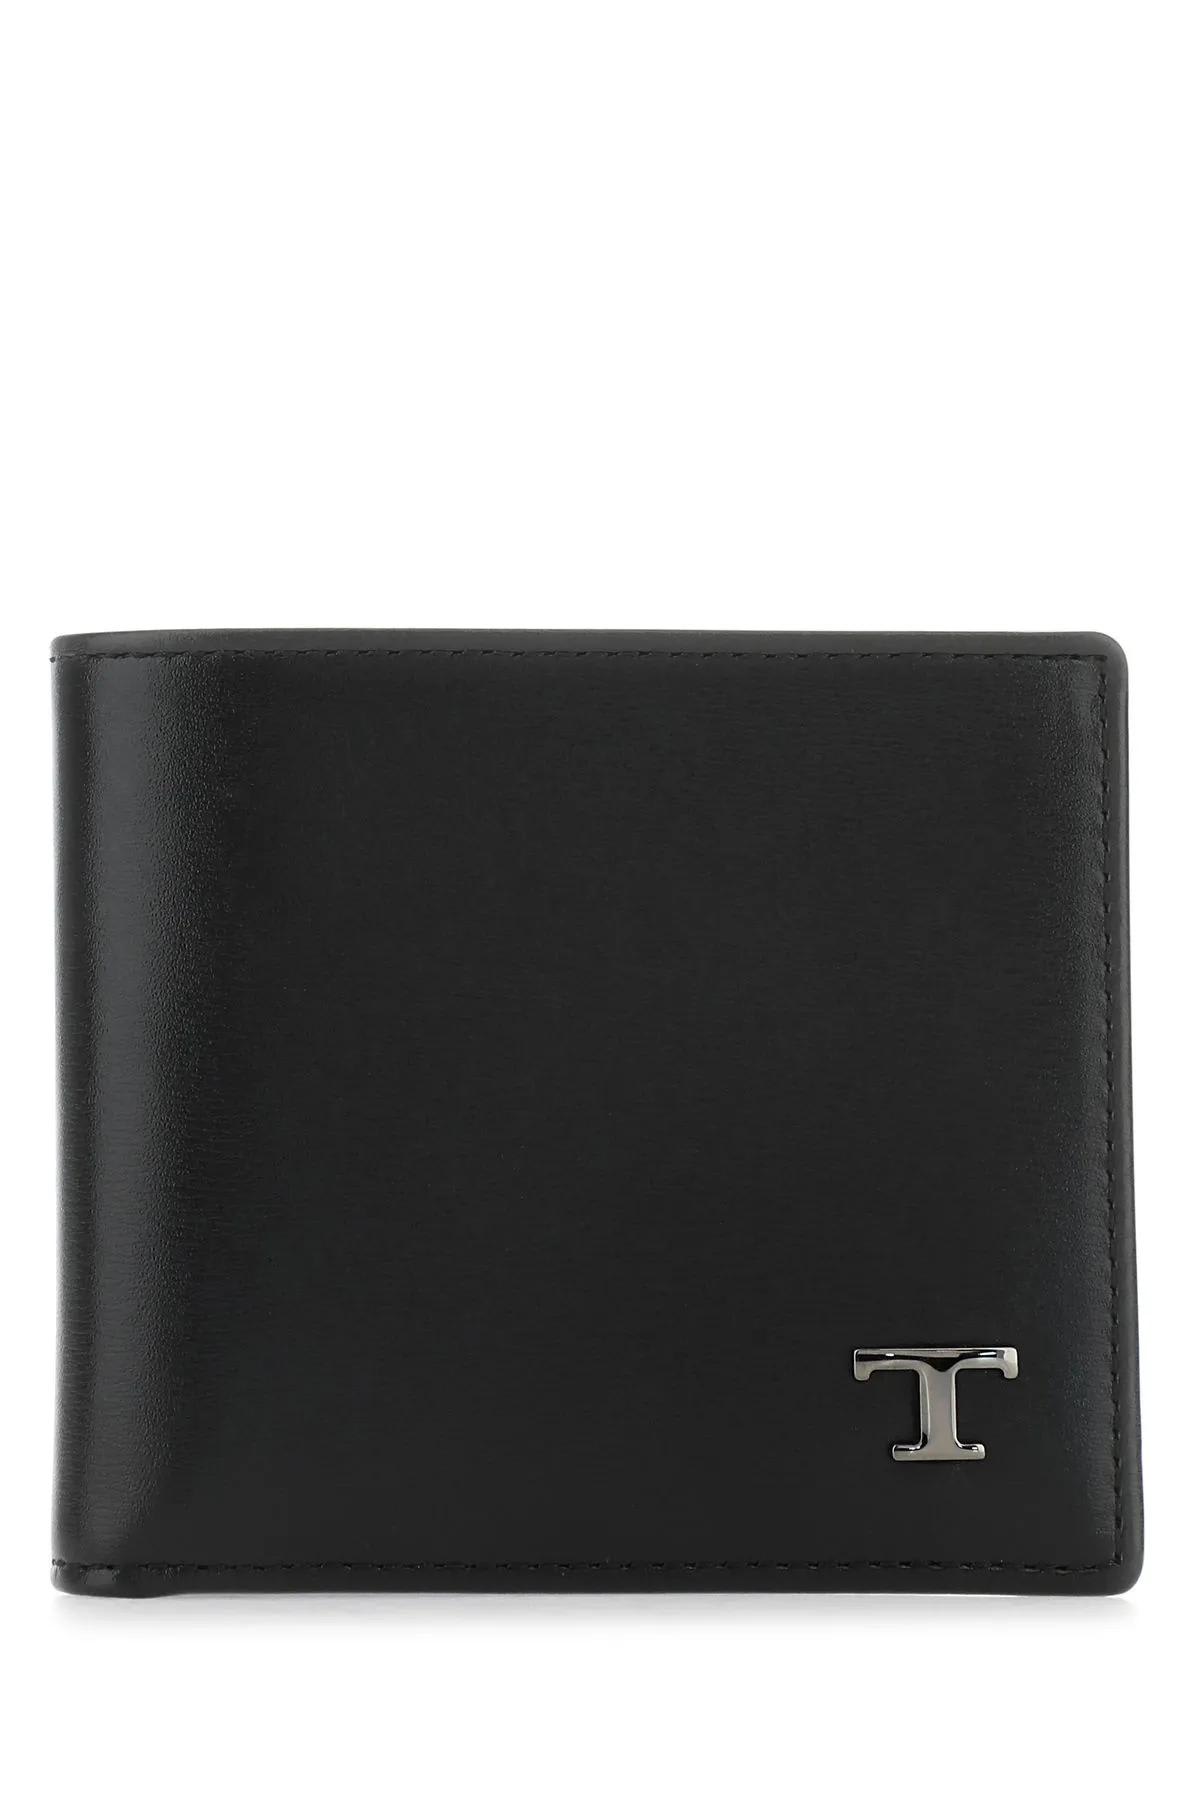 TOD'S BLACK LEATHER WALLET TODS